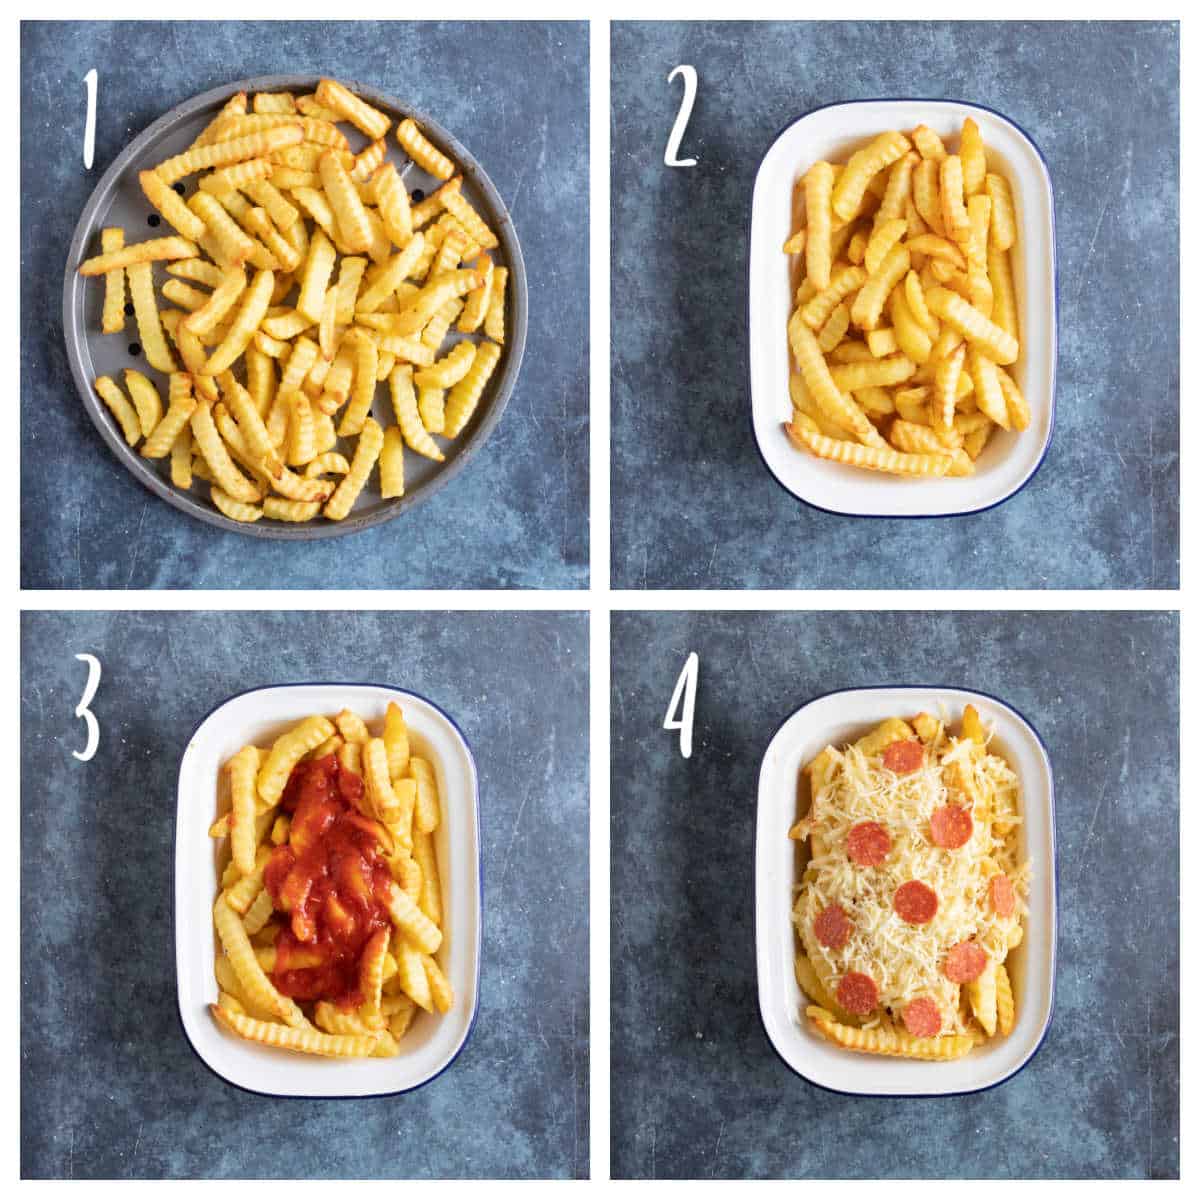 Step by step photo instructions for making pizza fries.